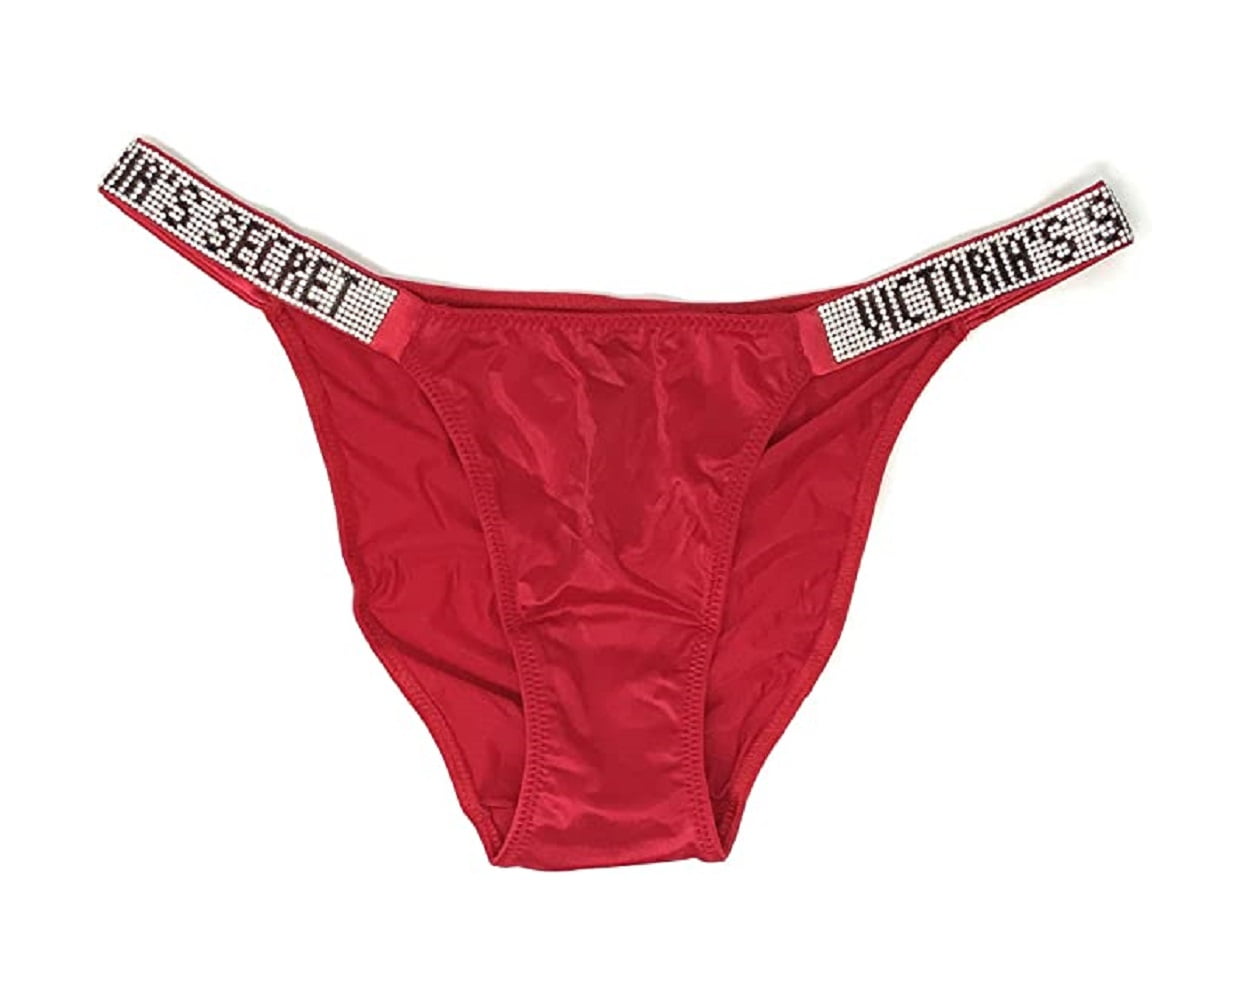 Personalize Your Own Victoria Secret Red Lace Waist Thong * FAST